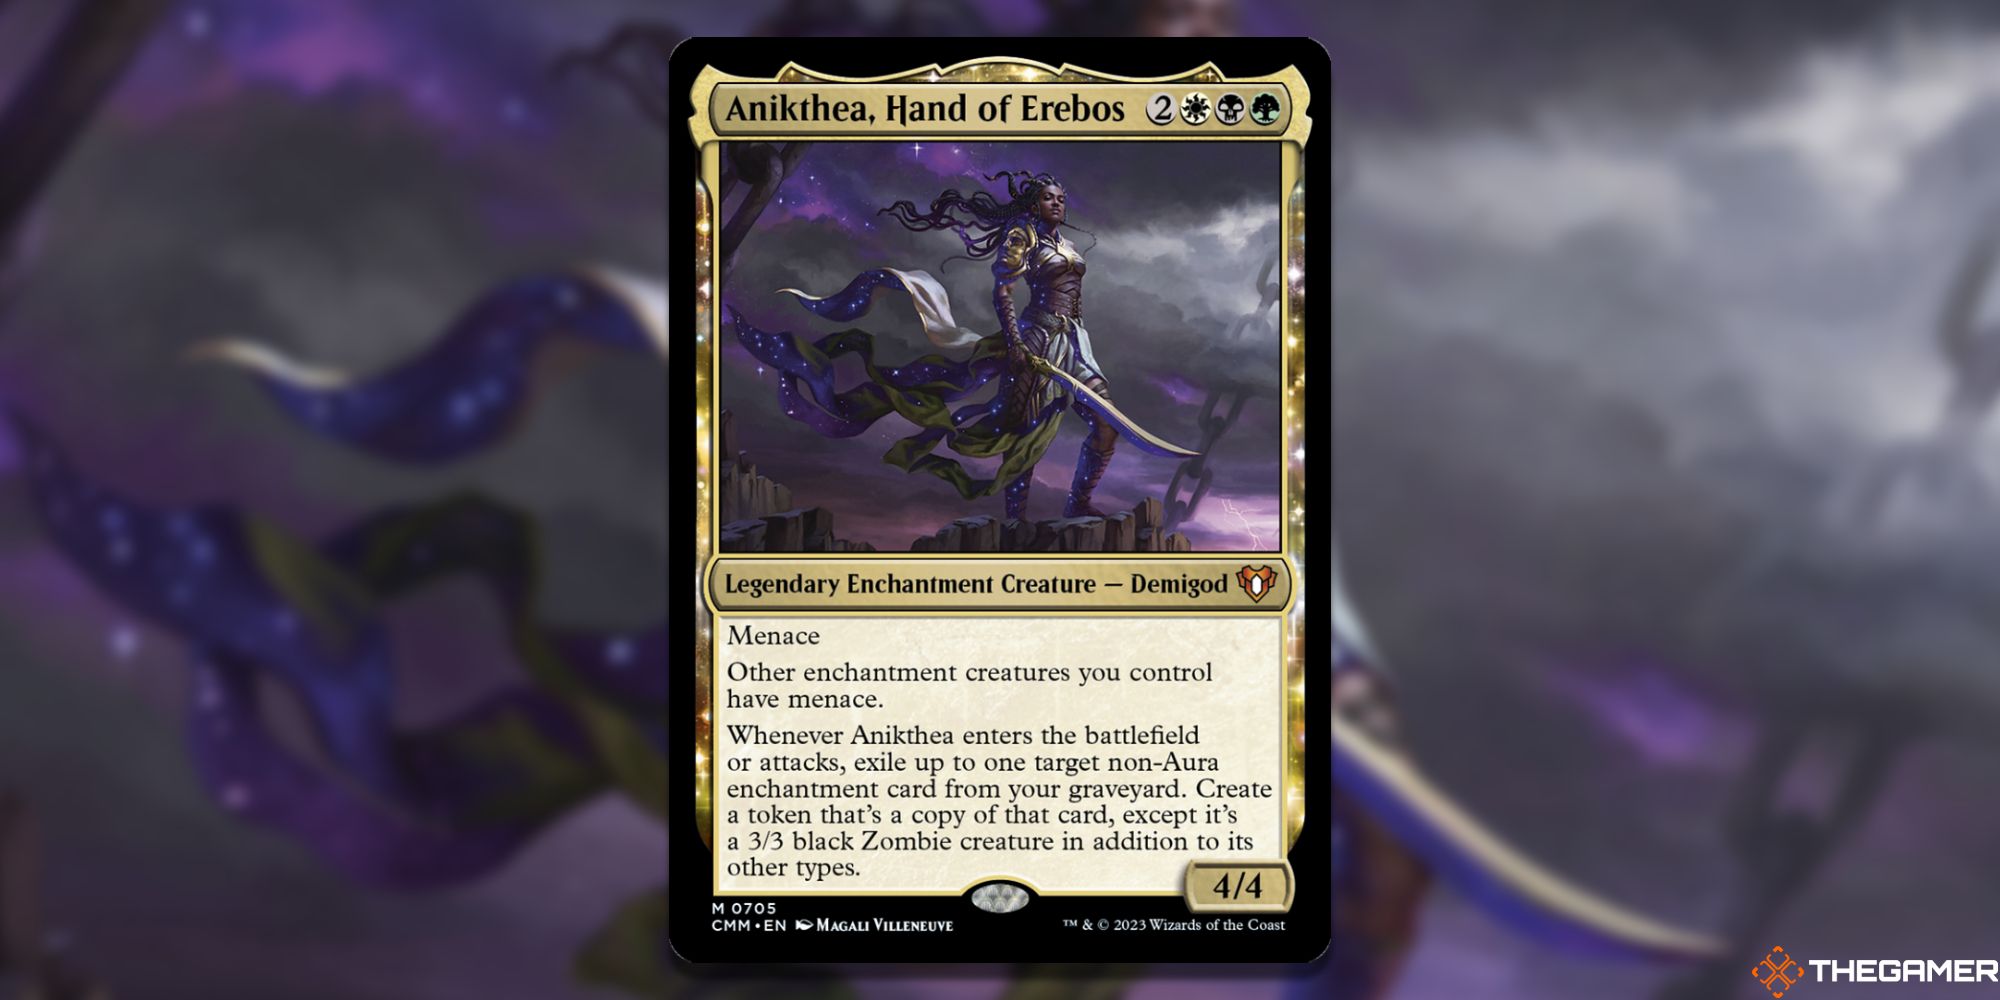 Image of the Anikthea, Hand of Erebos card in Magic: The Gathering, with art by Magali Villenuve